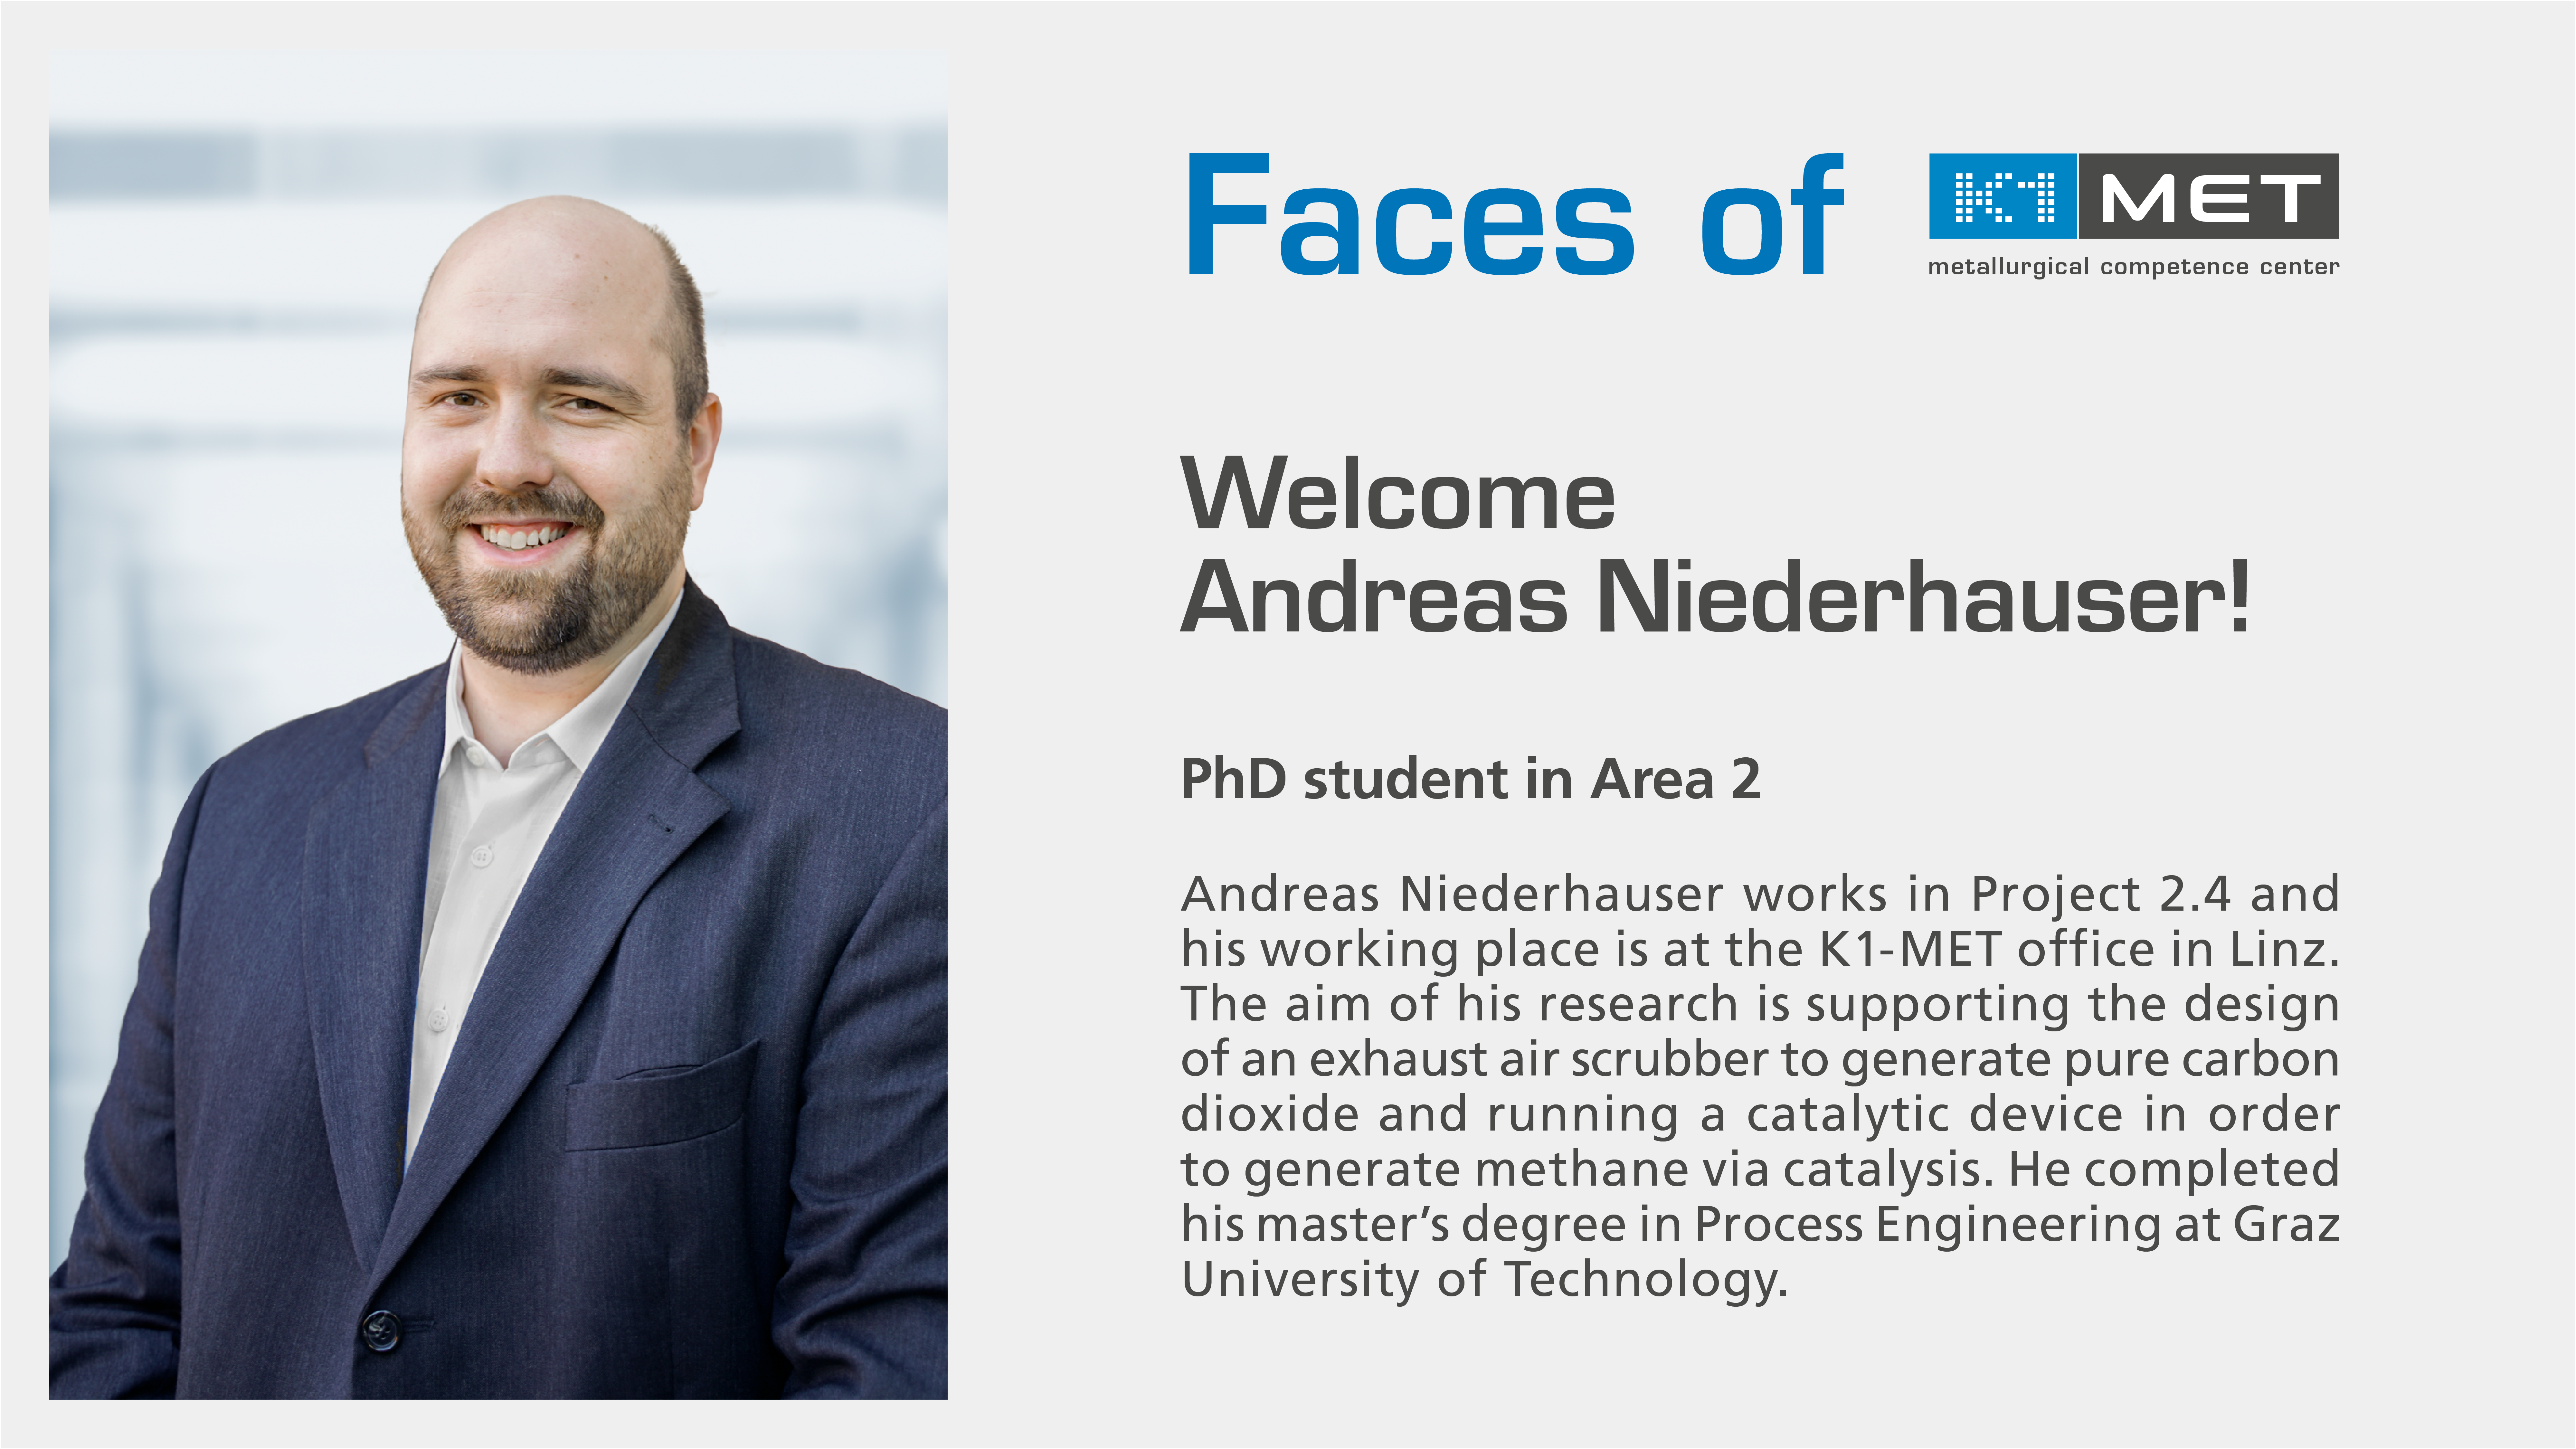 Andreas Niederhauser works in Project 2.4 at K1-MET. His working place is at the K1-MET office in Linz. The aim of his research is supporting the design of an exhaust air scrubber to generate pure carbon dioxide and running a catalytic device in order to generate methane via catalysis. Andreas completed his master’s degree in Process Engineering at Graz University of Technology.